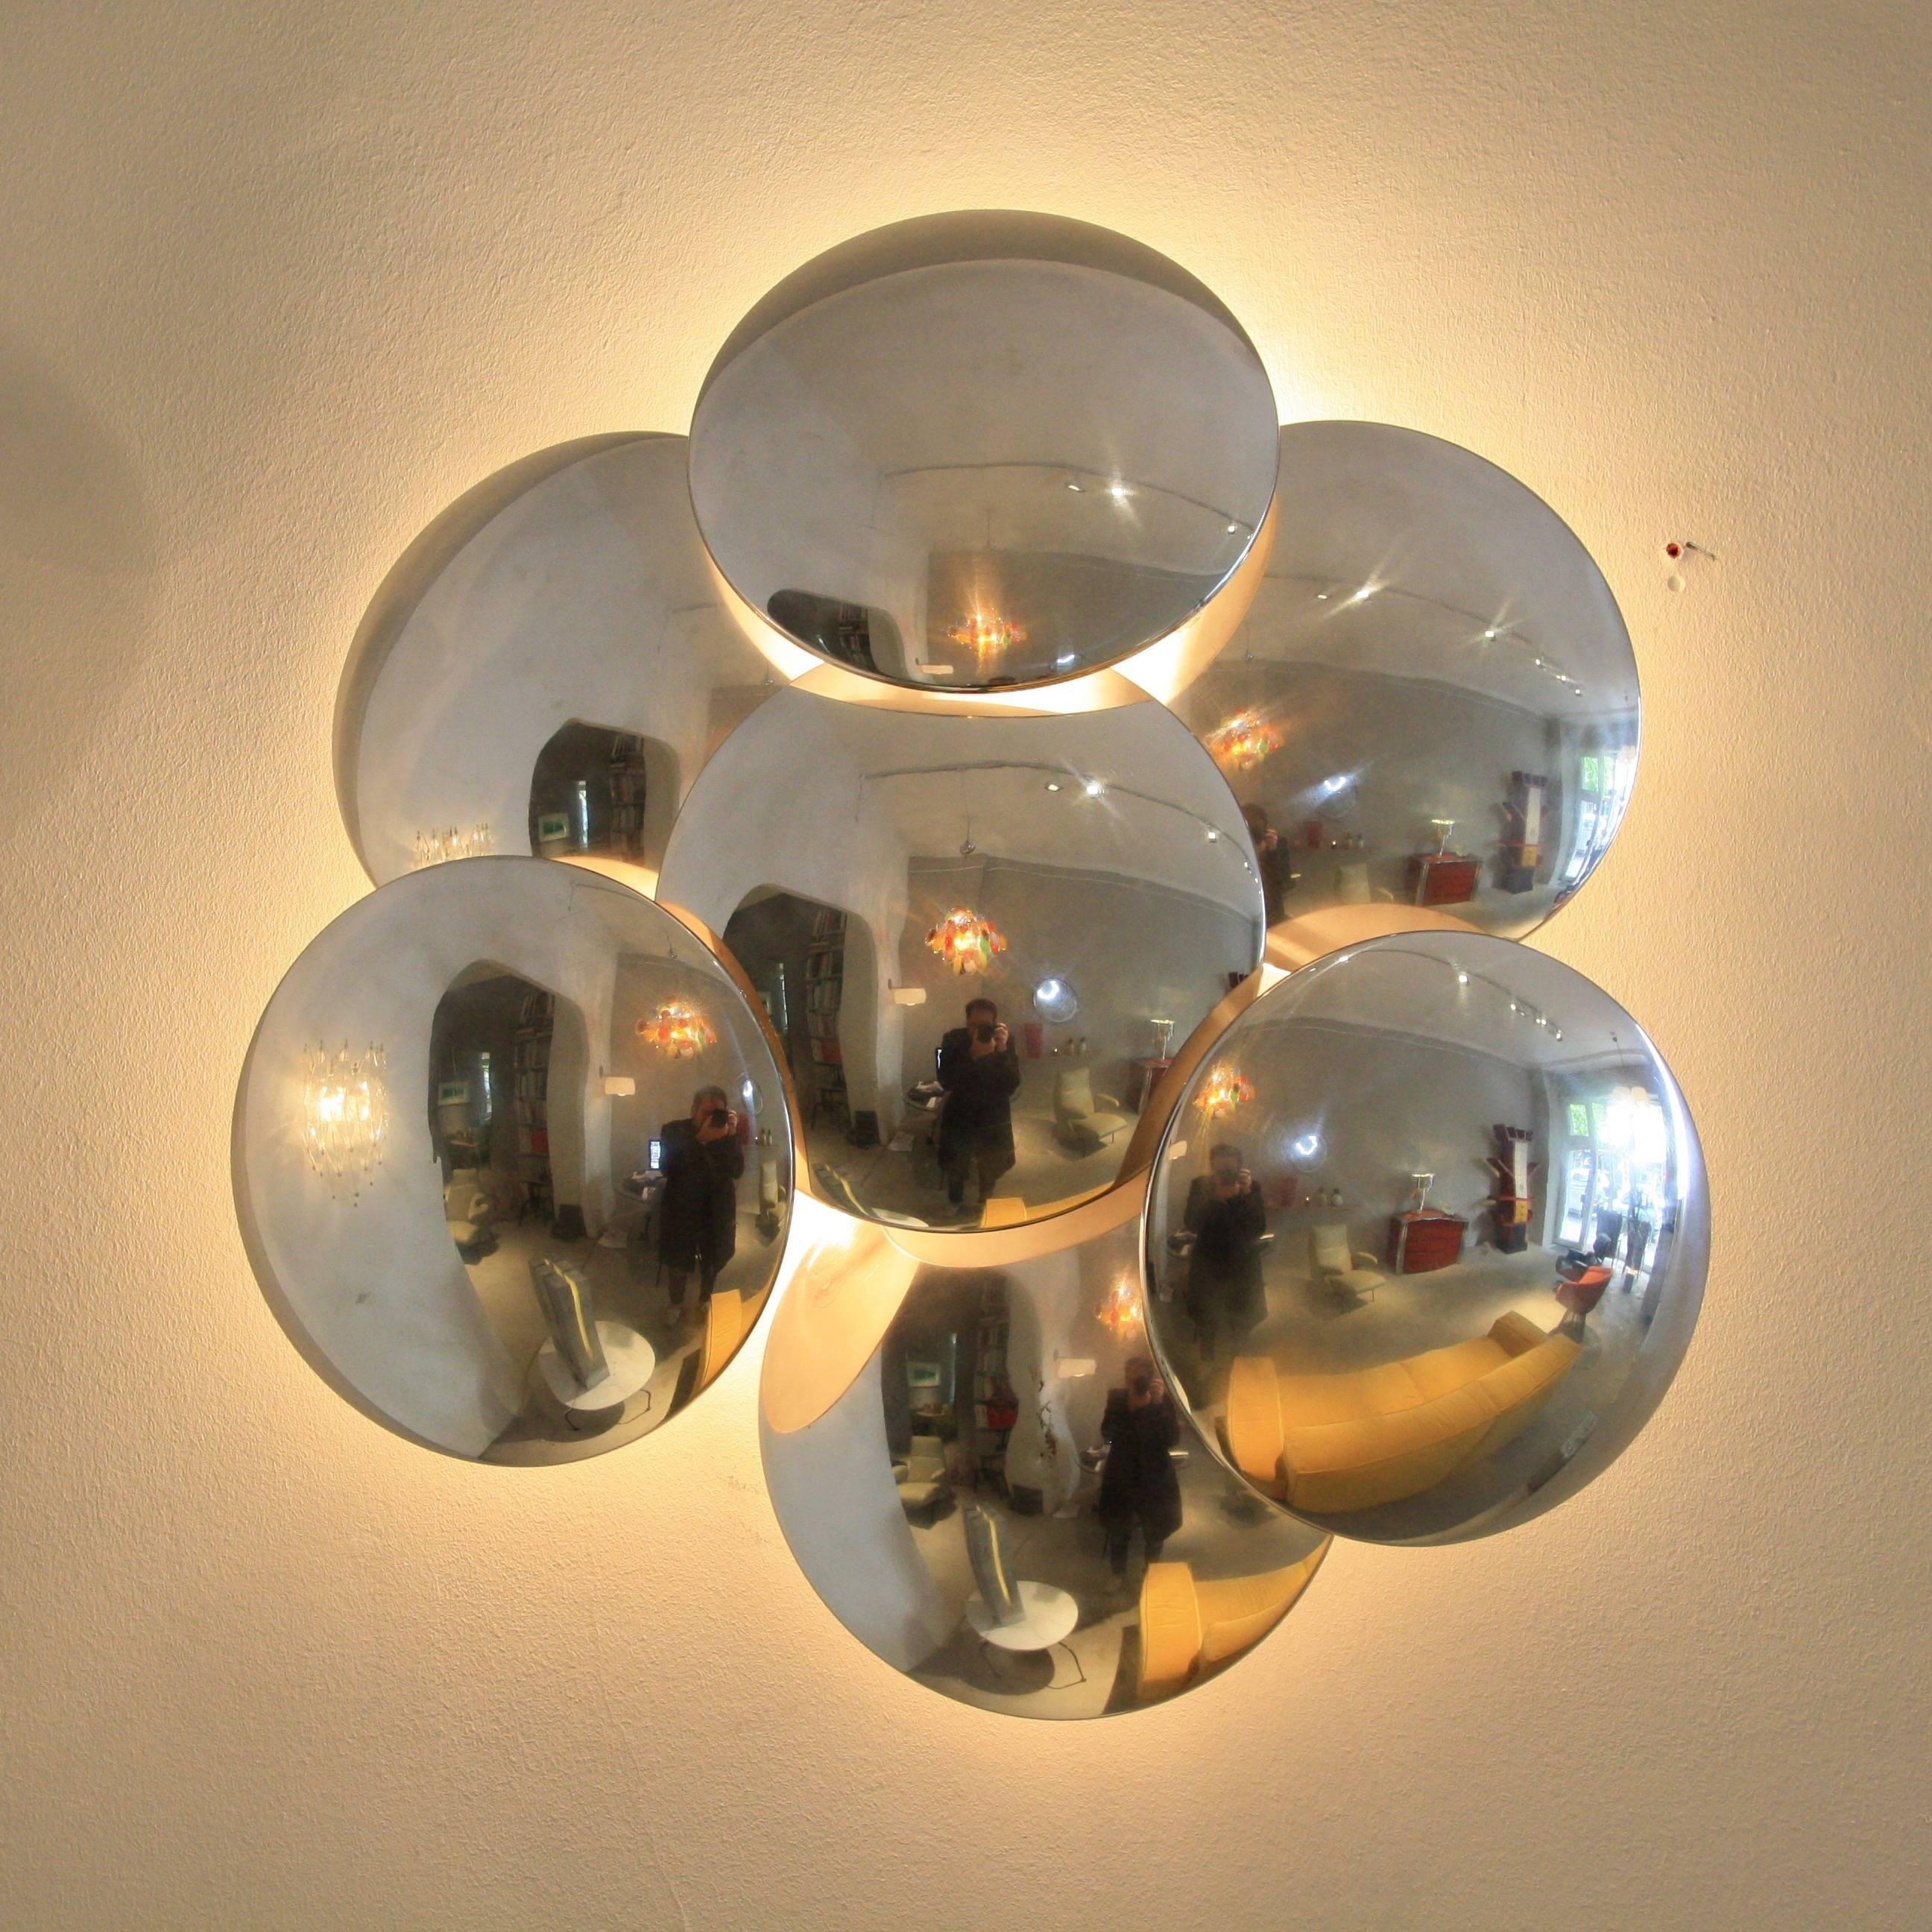 Reggiani wall sconce, Italy 1970s.

Seven disk wall sconce with three-light fittings, chrome disk and white metal frame.